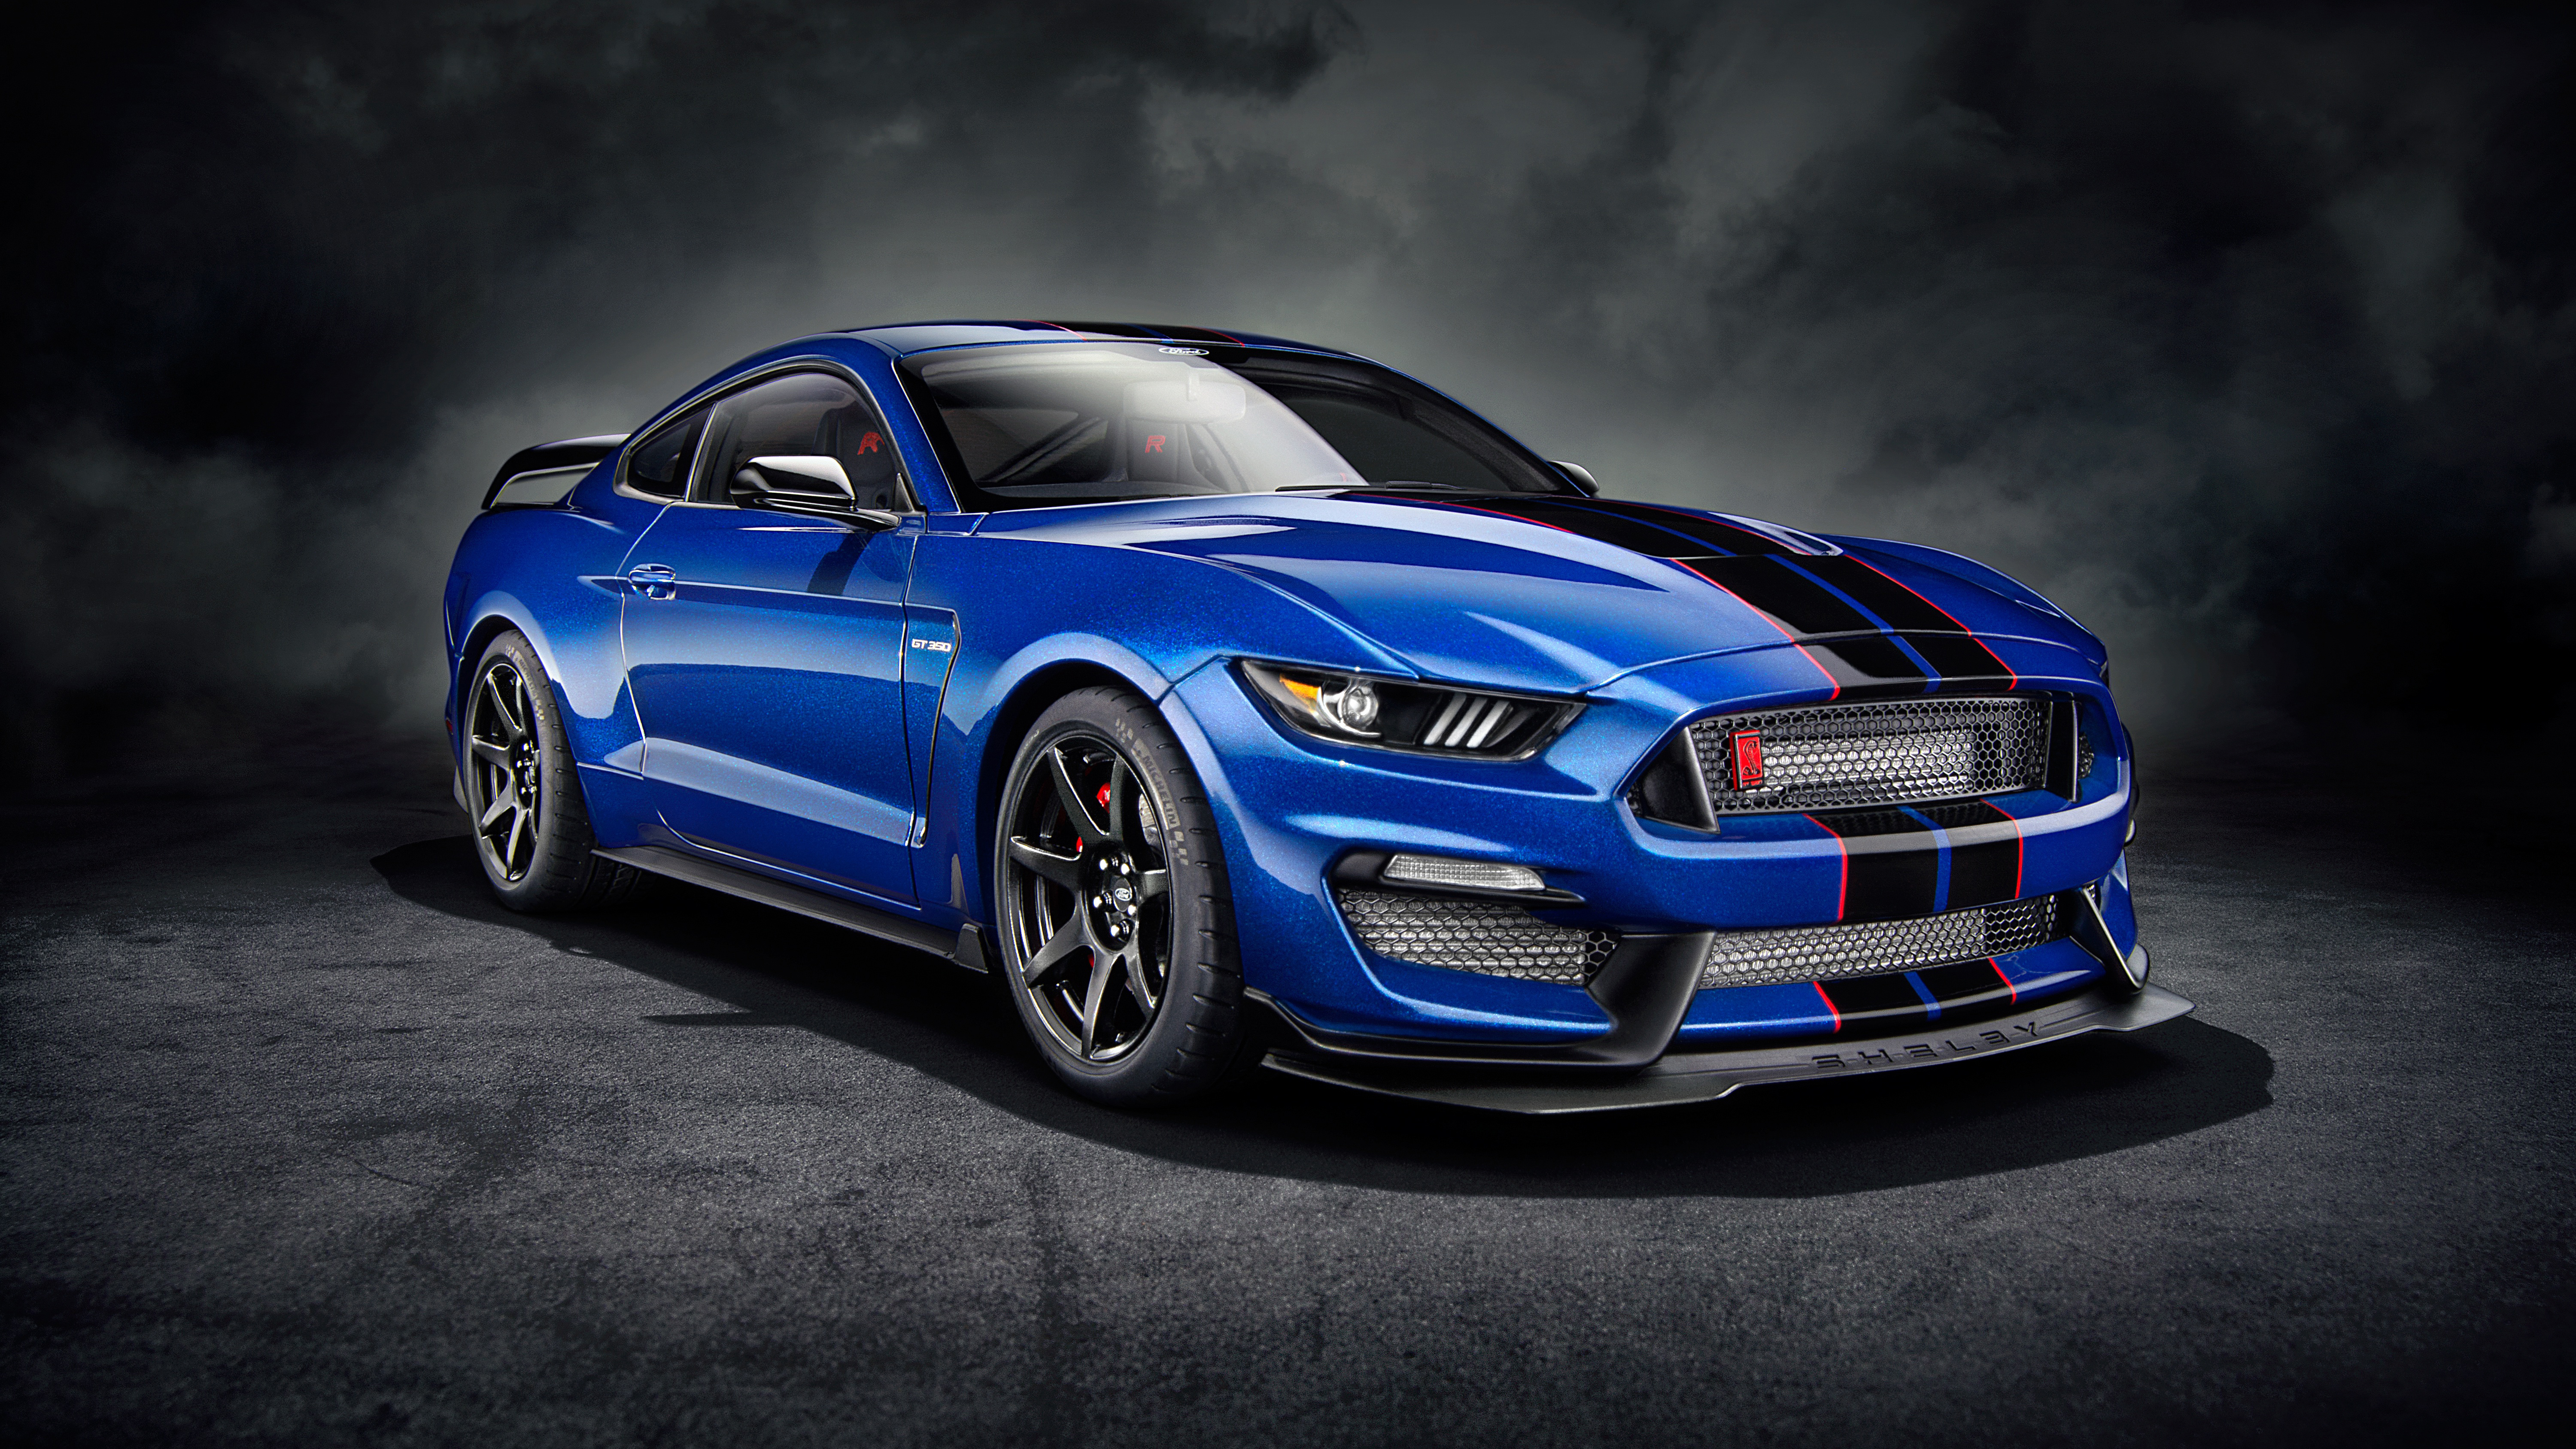 Ford Mustang Shelby GT350 R Wallpaper HD Car Wallpapers ID 14961